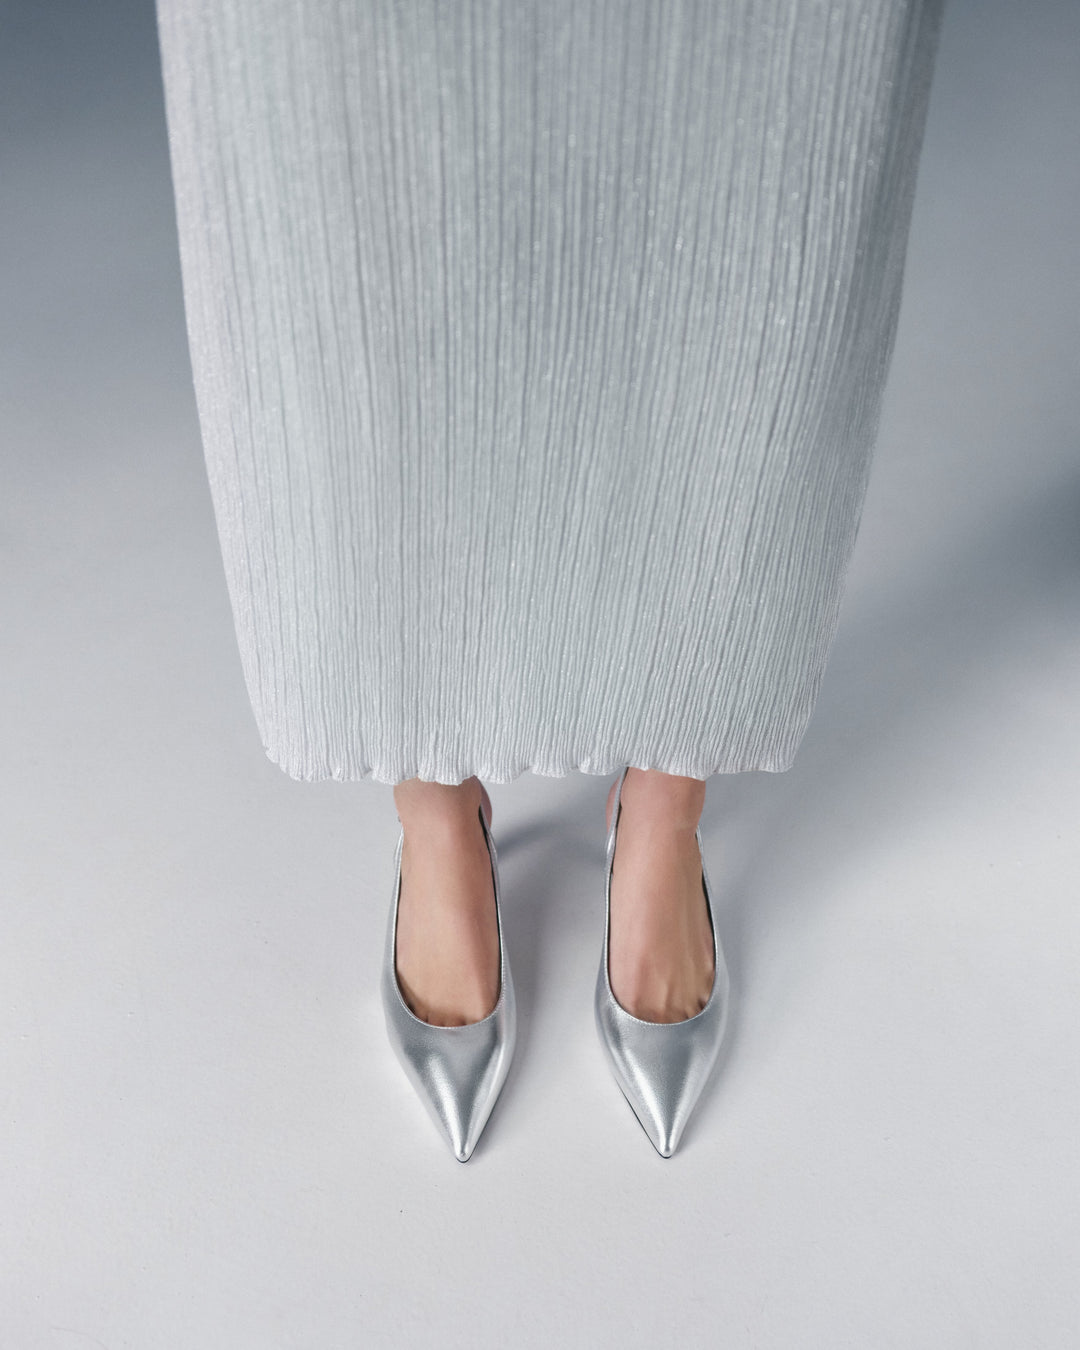 Estro X MustHave silver women's slingback pumps made of genuine leather - presentation in a complete outfit.